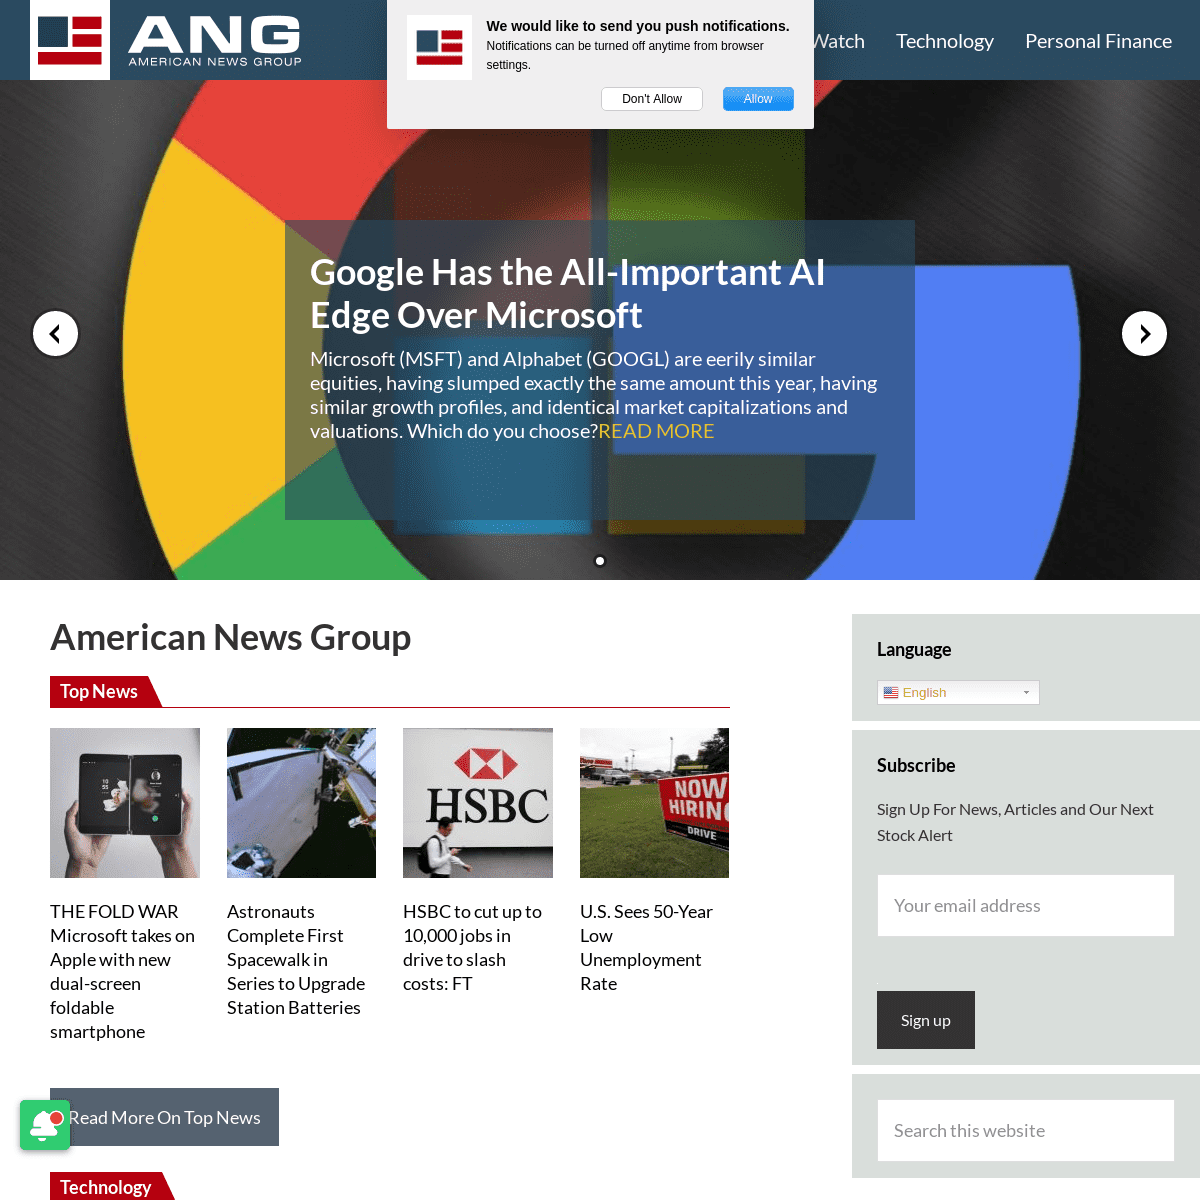 A complete backup of americannewsgroup.com